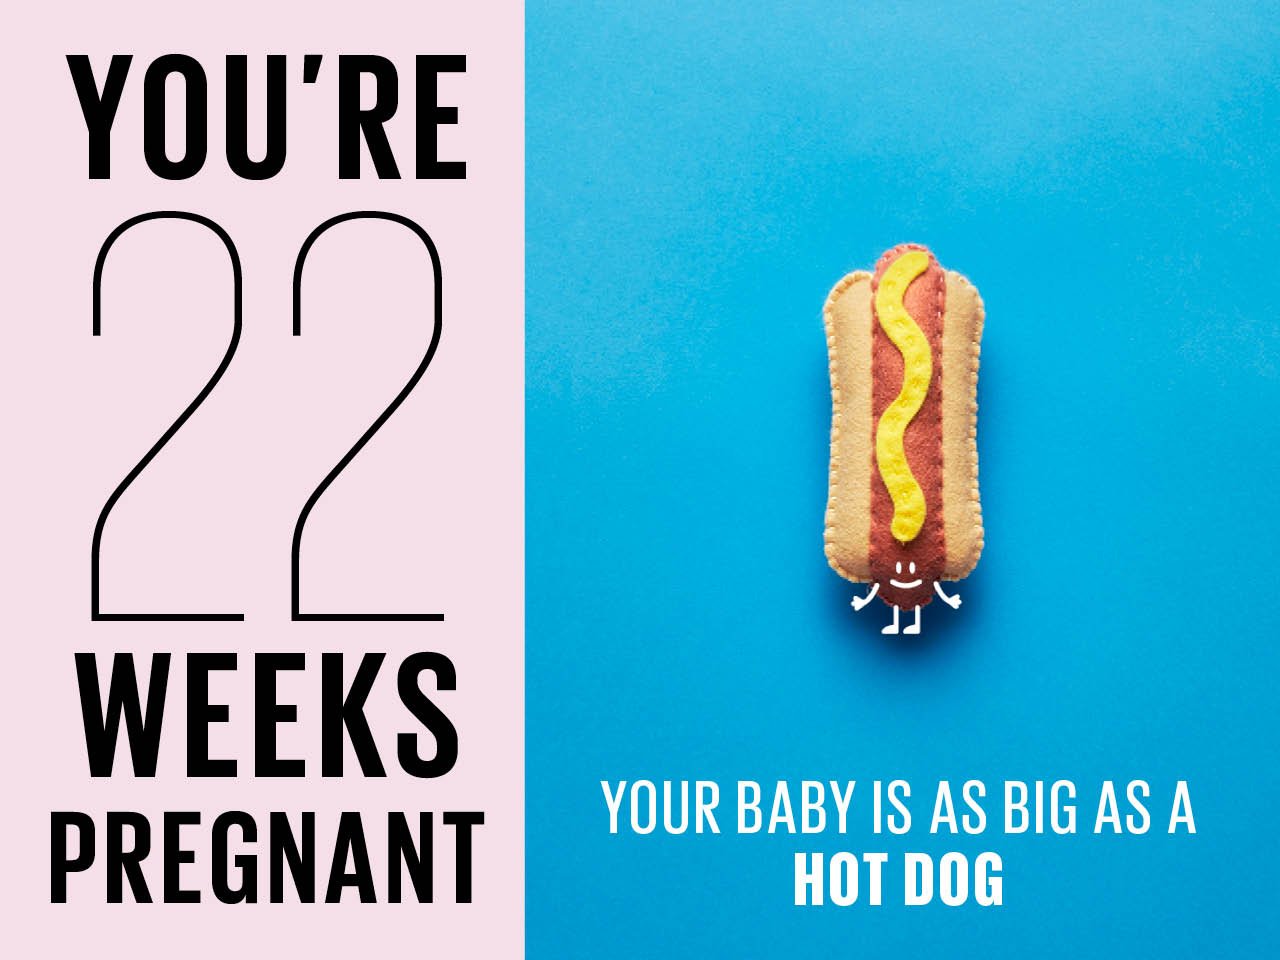 Felt hot dog used to show how big baby is at 22 weeks